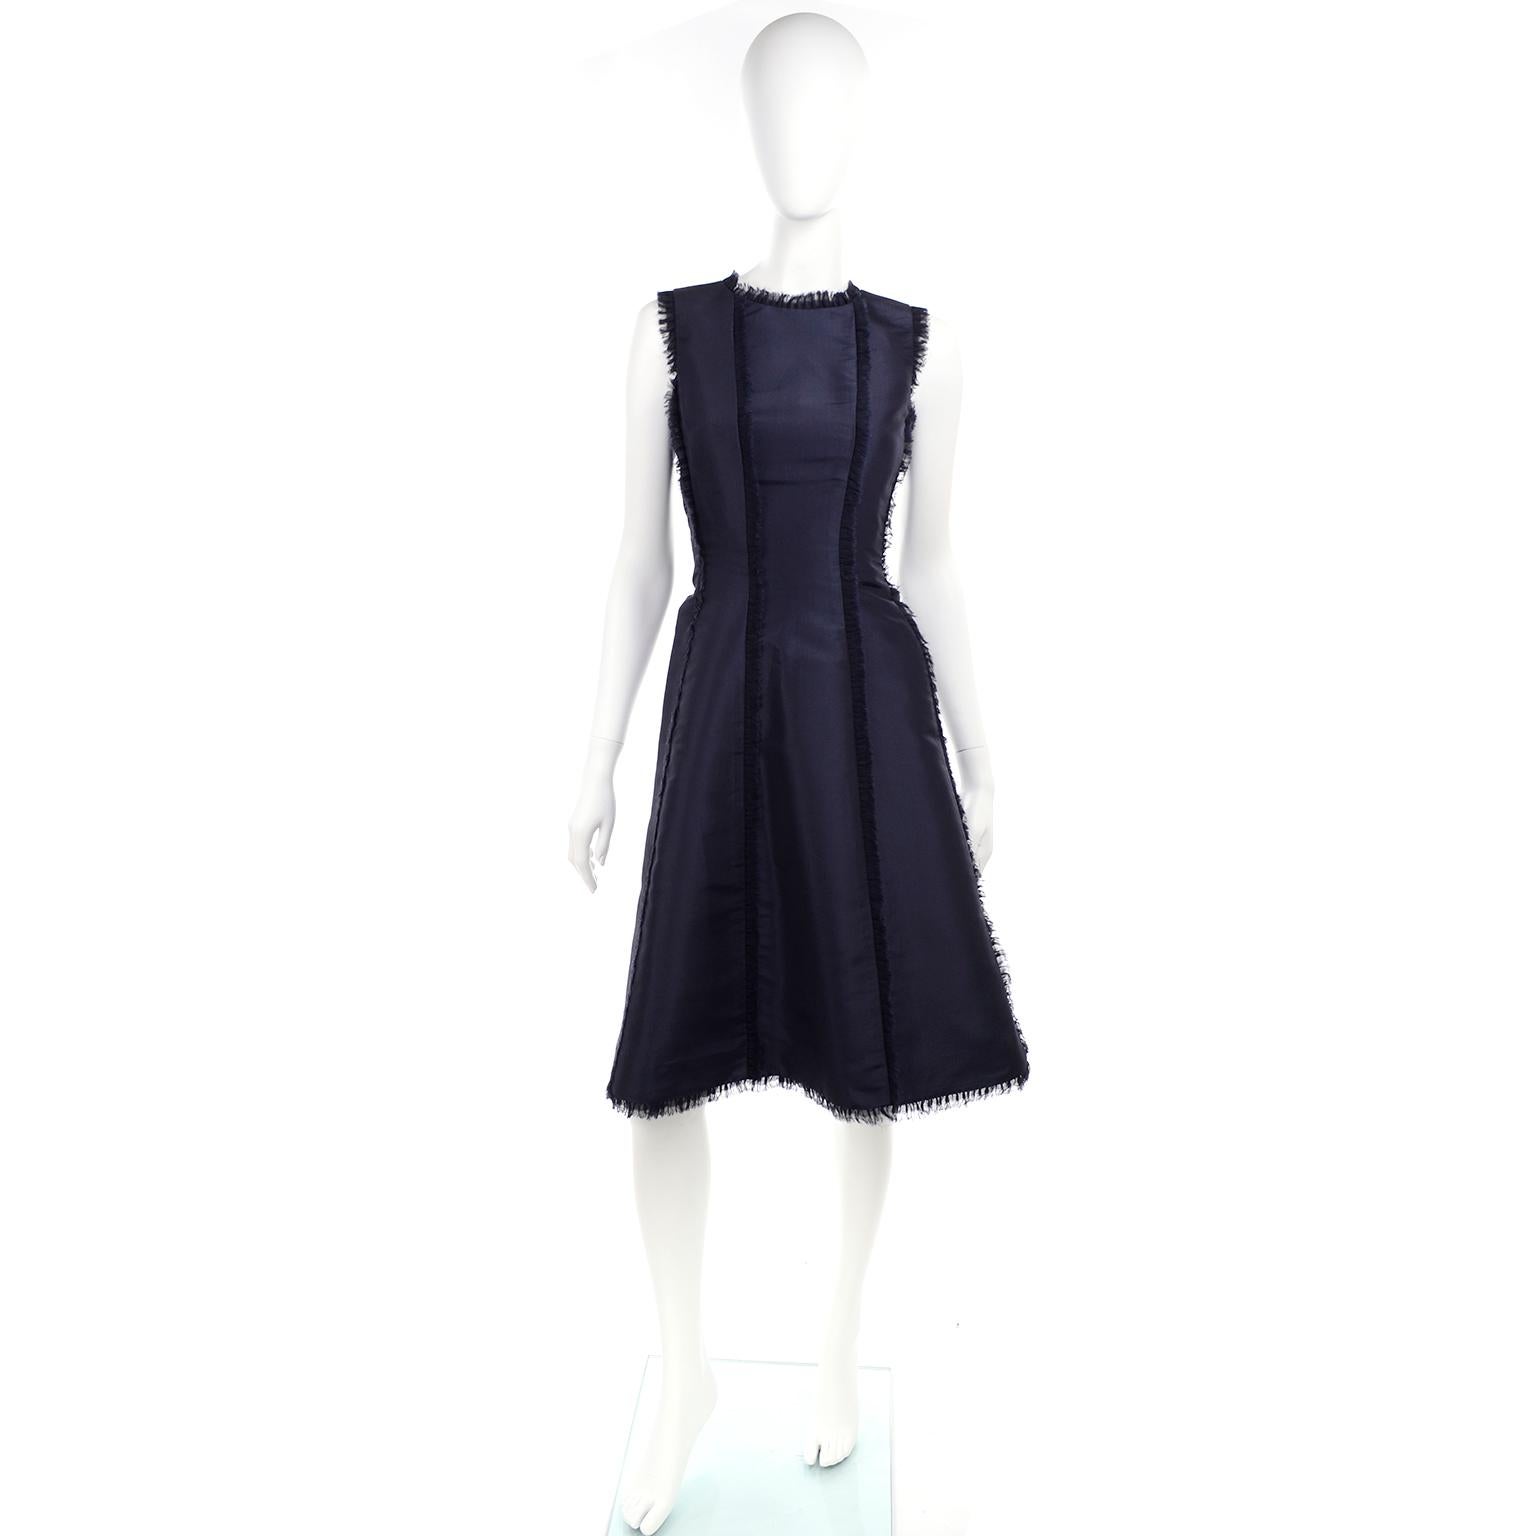 This is a gorgeous Oscar de la Renta rich lush blue silk dress. This perfectly structured dress is sleeveless, with eyelash frayed edges and exposed frayed seam detailing. We think it would make the perfect evening dinner dress or even a great